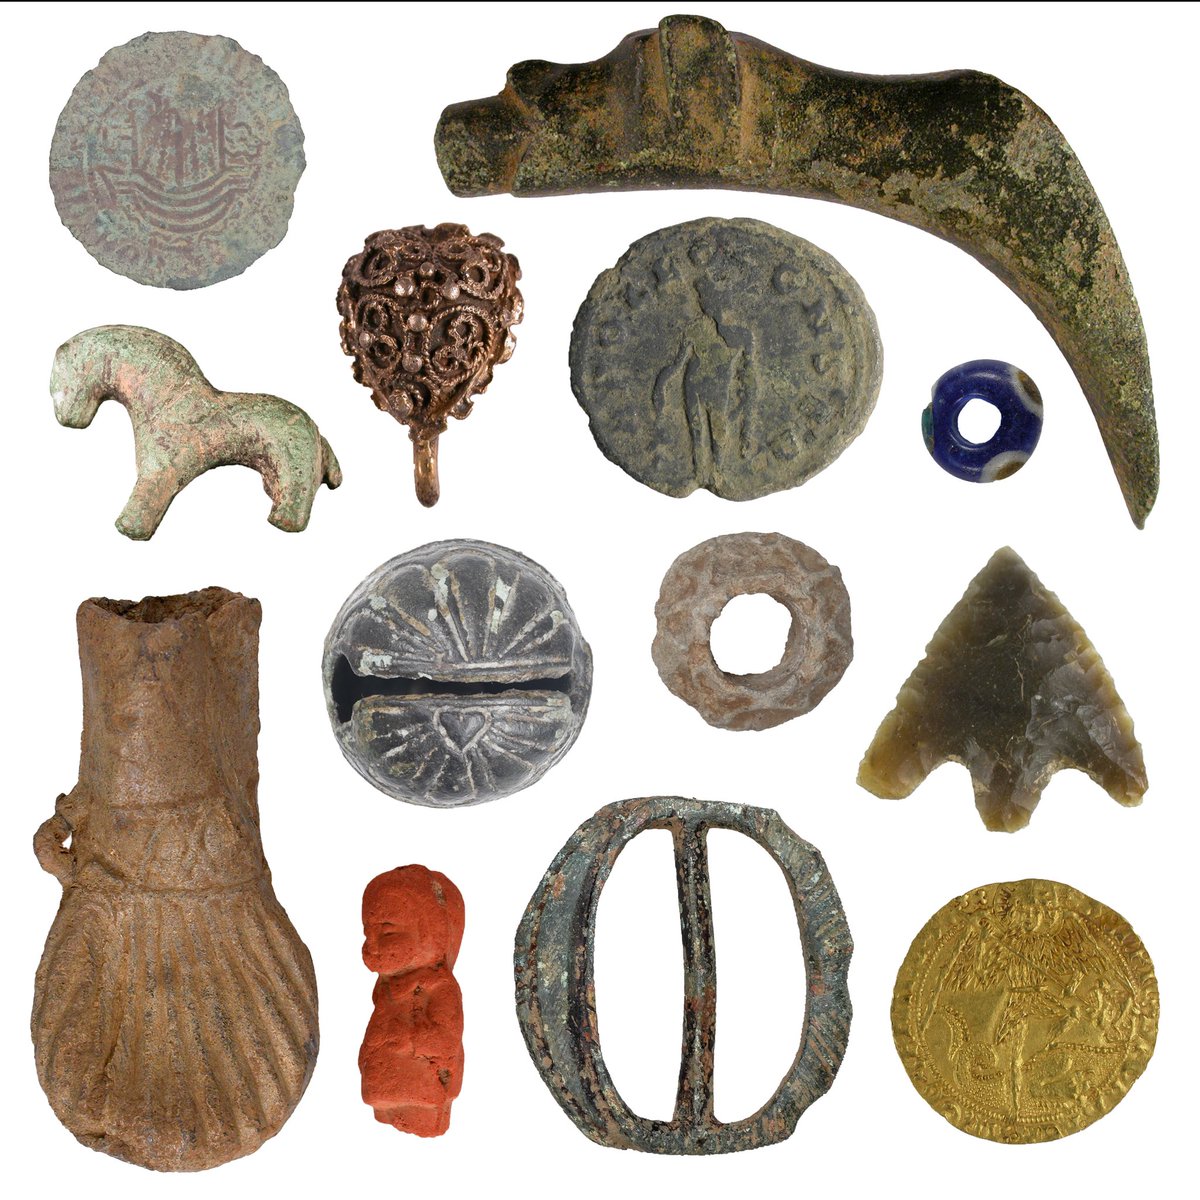 Bring your archaeological finds along to our next Finds Day!

Museum of Cornish Life, Helston
Saturday March 18th - 12-3pm 

Follow the link to book your appointment:

calendly.com/flocornwall/fi…

#PortableAntiquitiesScheme #RecordYourFinds #MuseumOfCornishLife #Archaeology #Cornwall